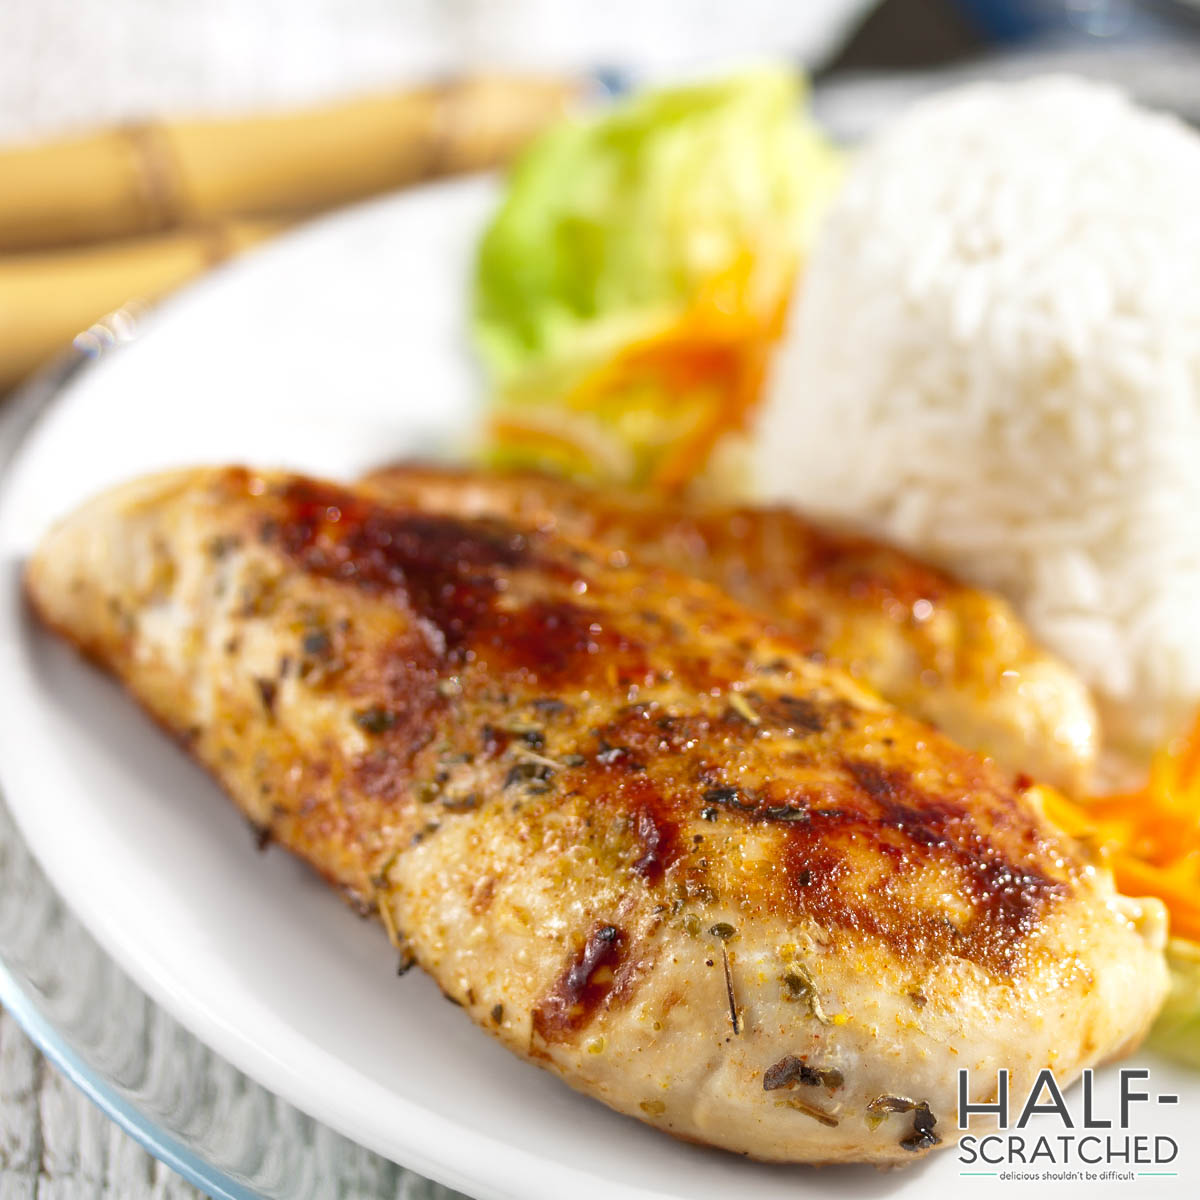 Broiled chicken breast